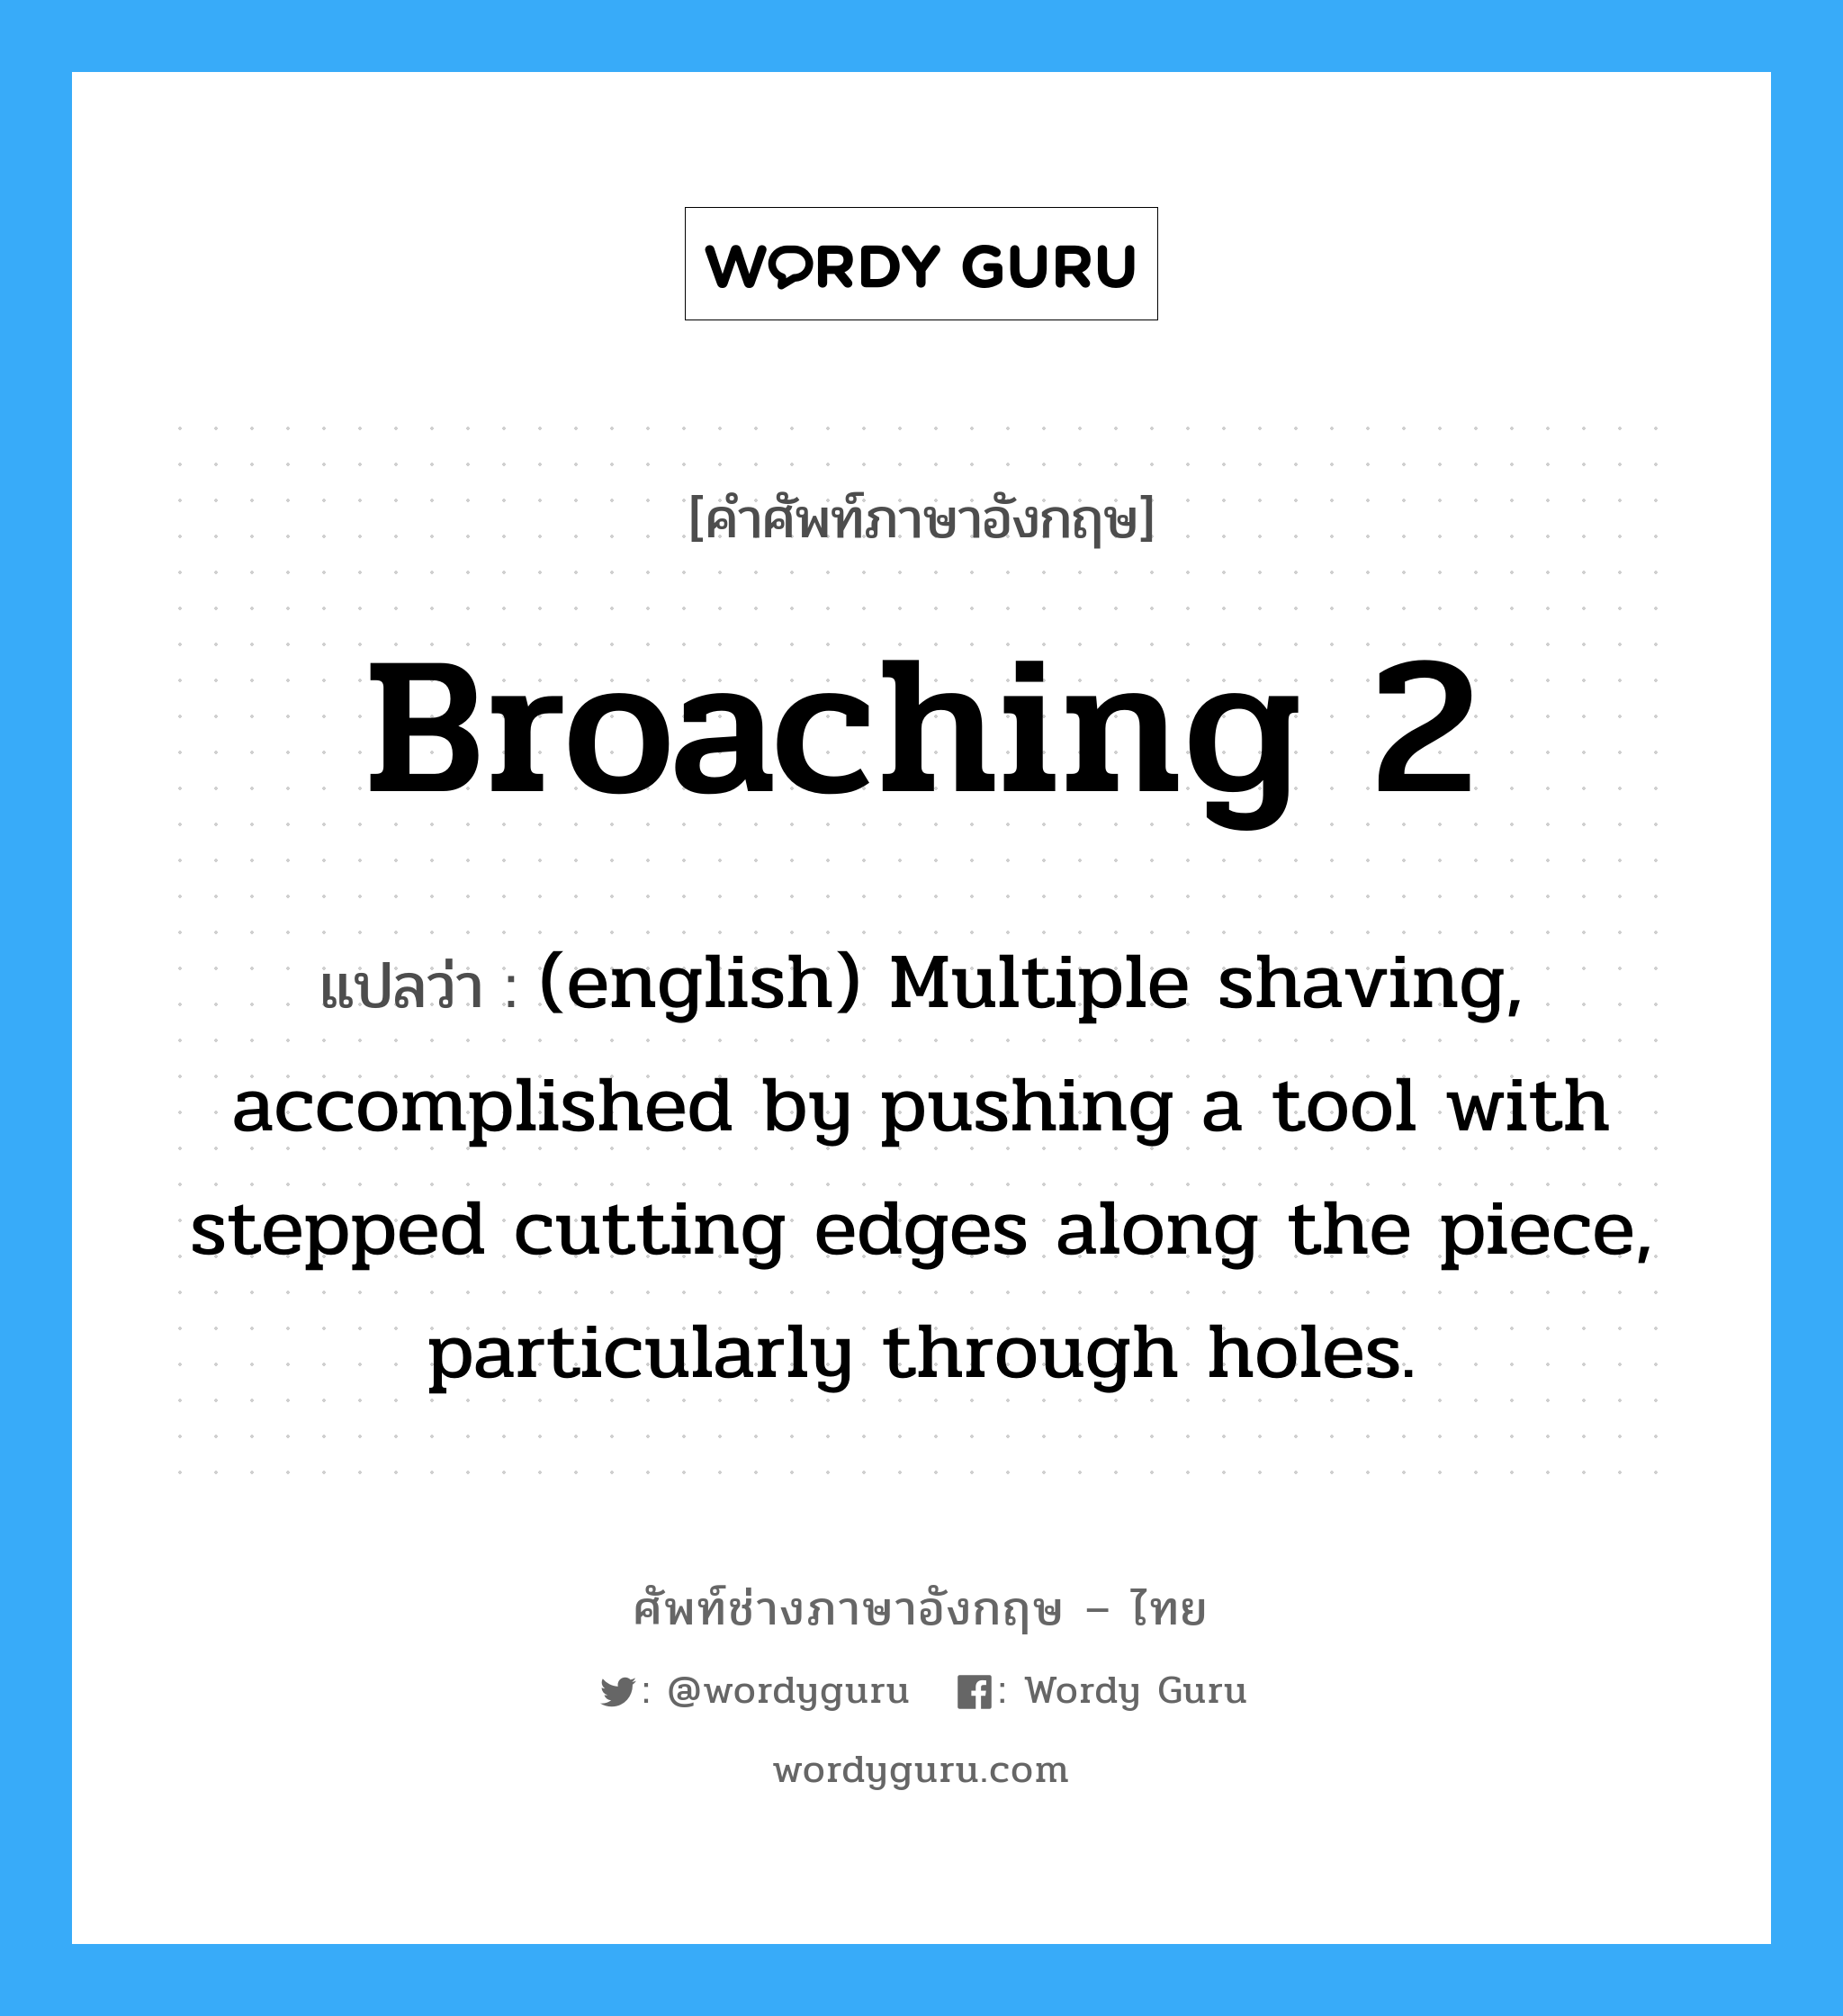 (english) Multiple shaving, accomplished by pushing a tool with stepped cutting edges along the piece, particularly through holes. ภาษาอังกฤษ?, คำศัพท์ช่างภาษาอังกฤษ - ไทย (english) Multiple shaving, accomplished by pushing a tool with stepped cutting edges along the piece, particularly through holes. คำศัพท์ภาษาอังกฤษ (english) Multiple shaving, accomplished by pushing a tool with stepped cutting edges along the piece, particularly through holes. แปลว่า Broaching 2